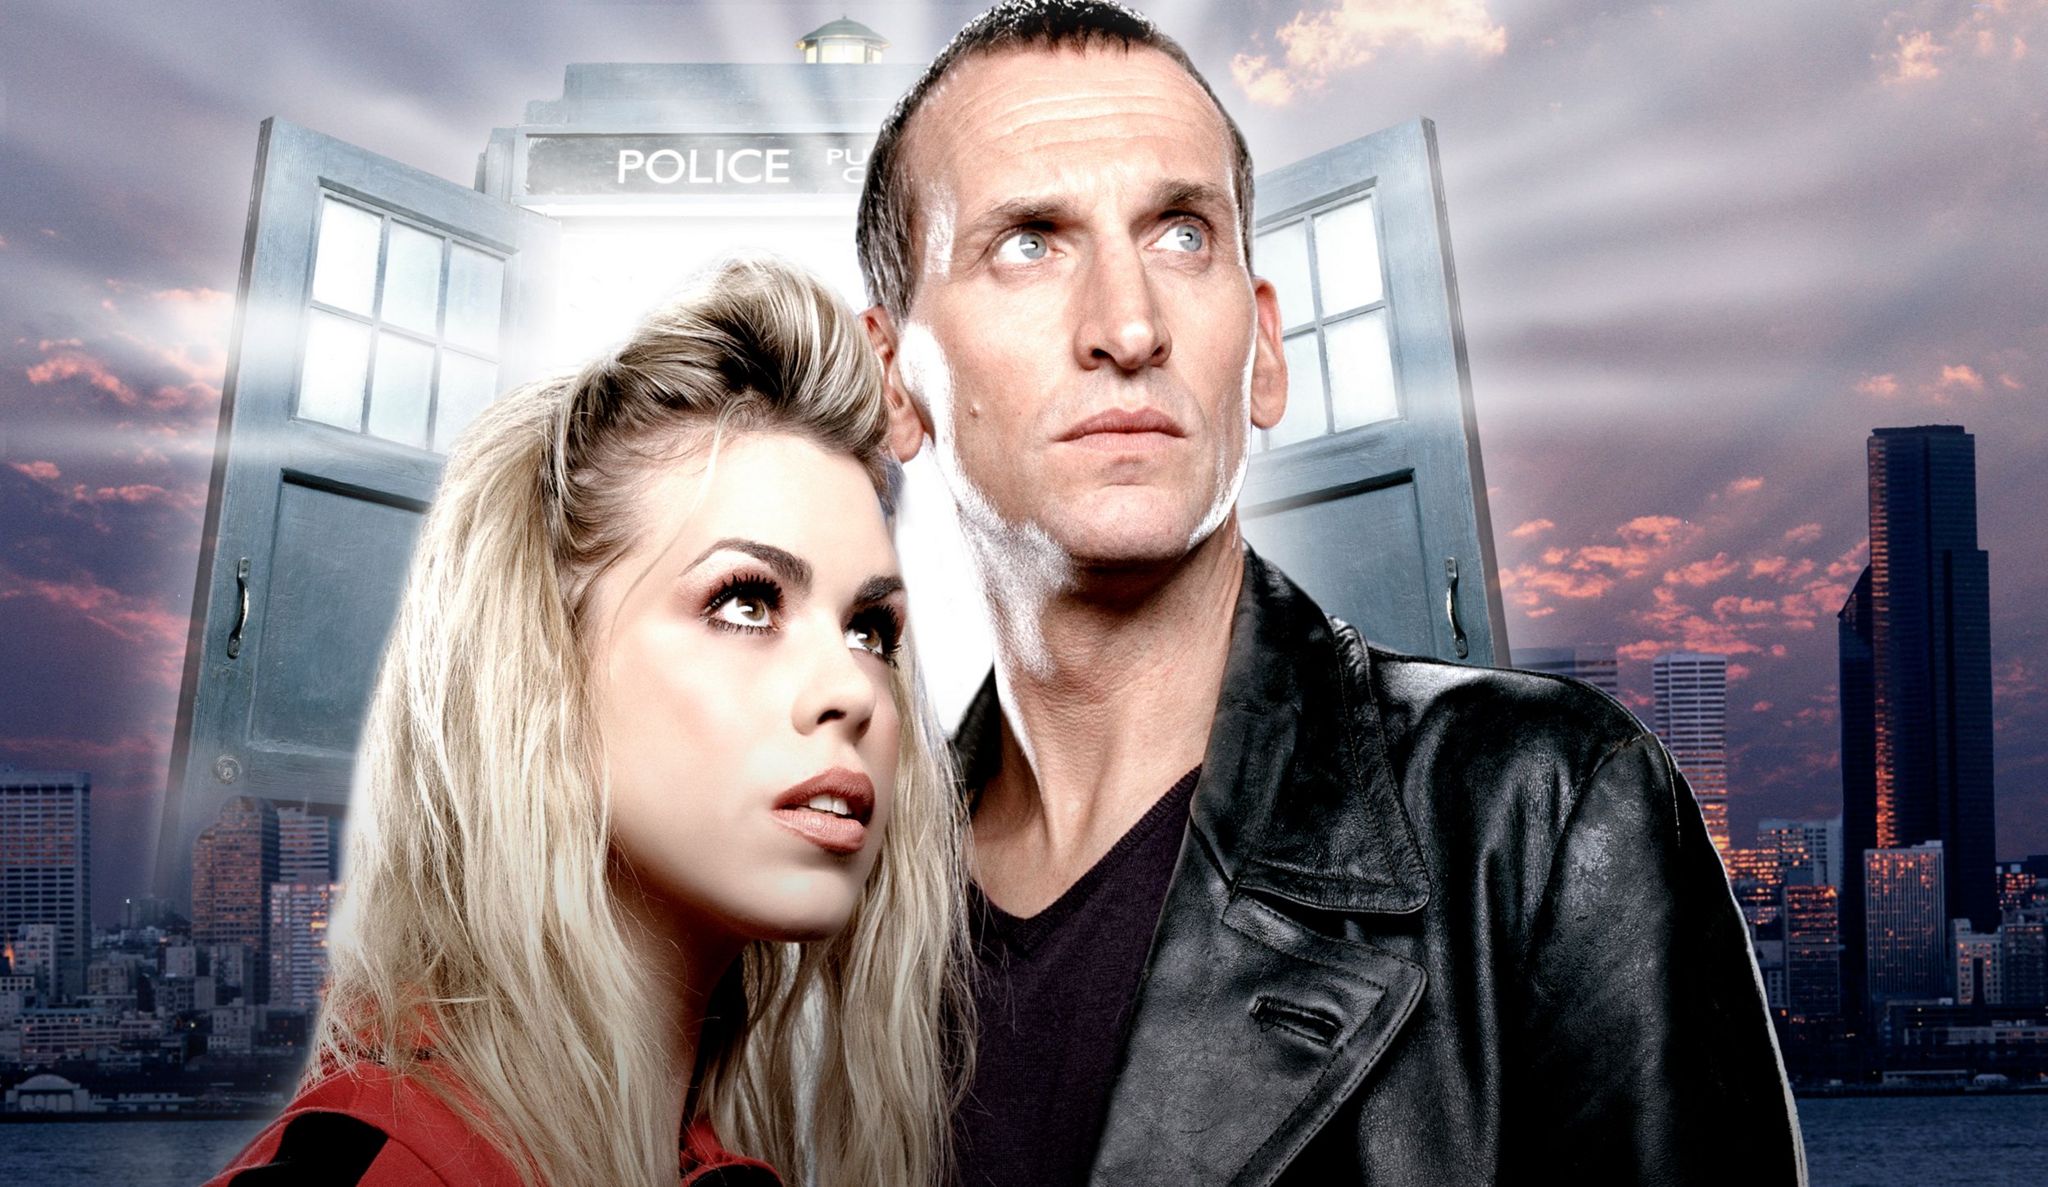 Promotional image for 2005 series with Billie Piper and Christopher Eccleston